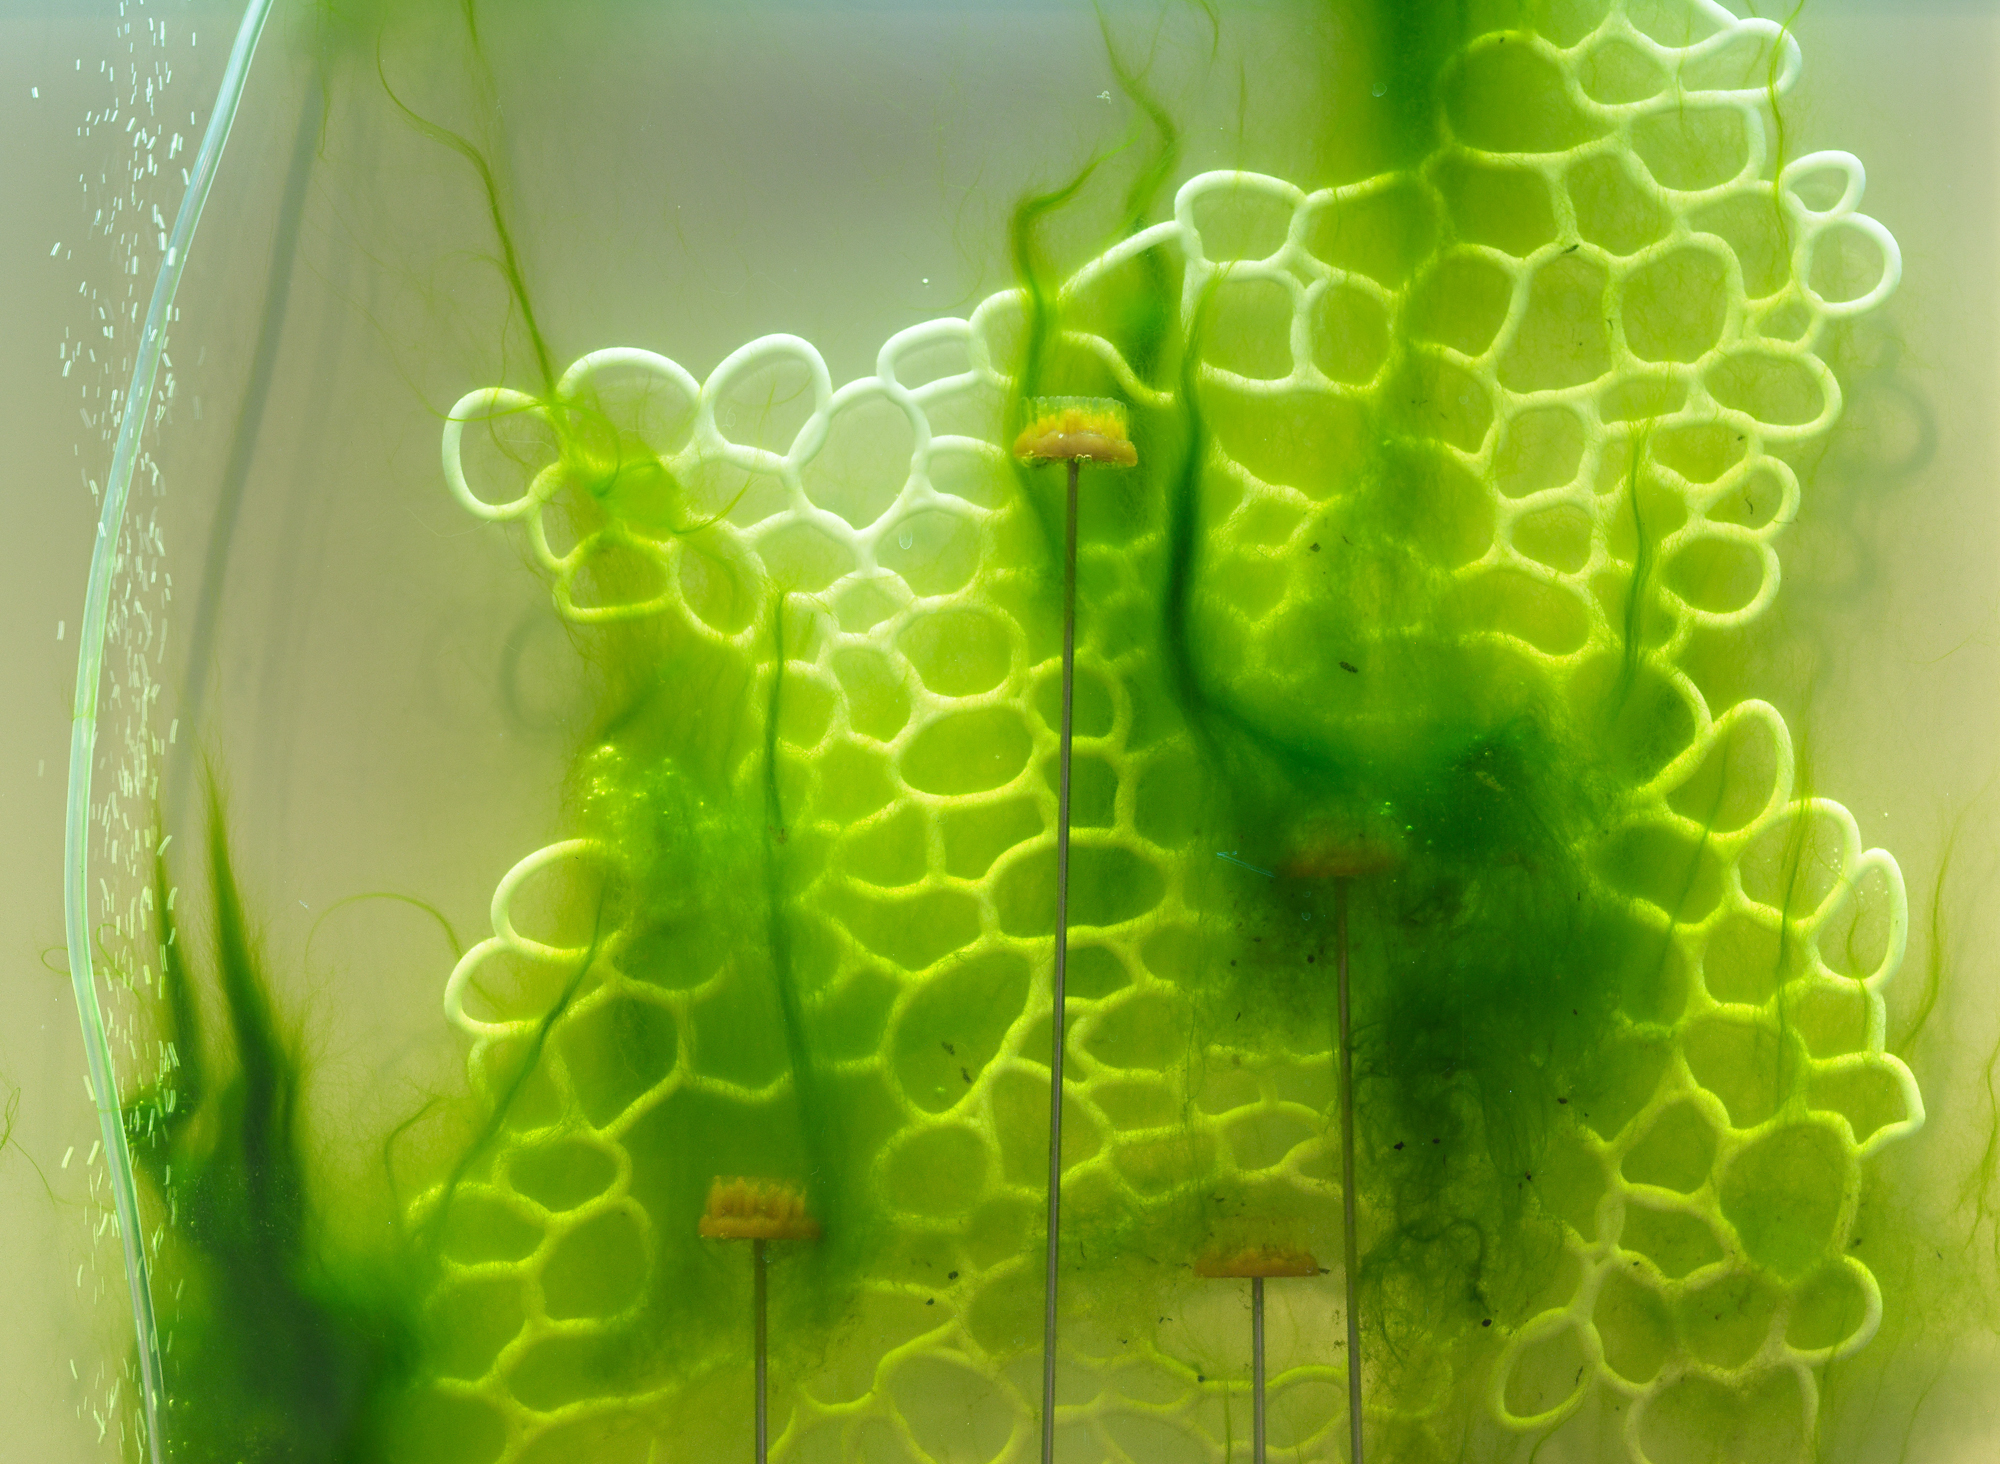 Close up detail image of bright green strands of algae clinging to a web of a white 3D printed bubble-like armature.